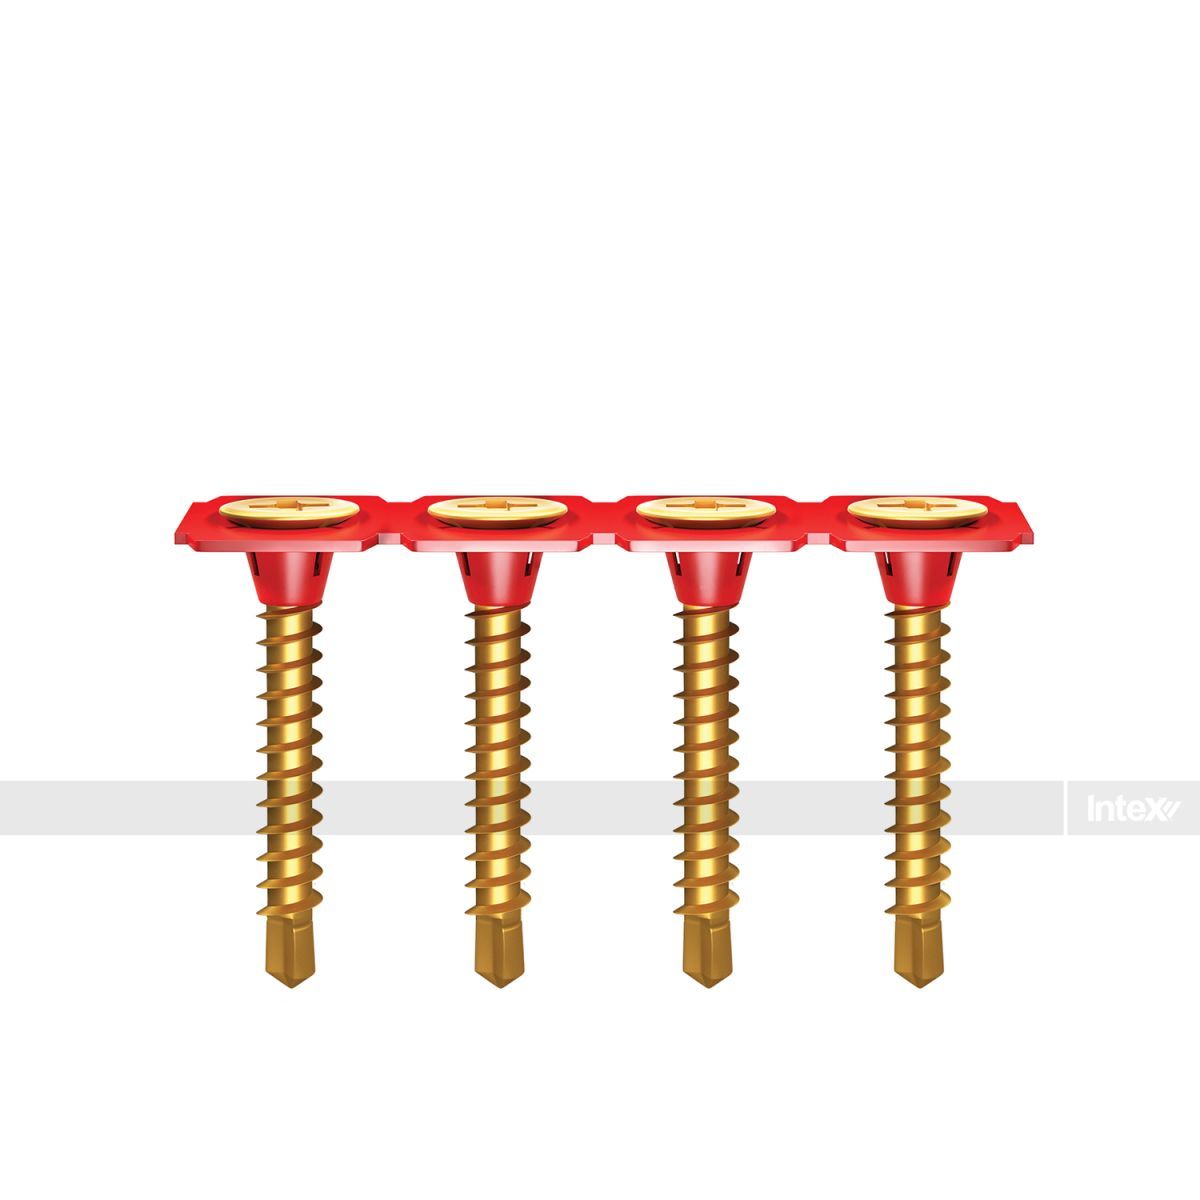 Intex 0.8 - 2.3mm Thick Metal Collated Screws